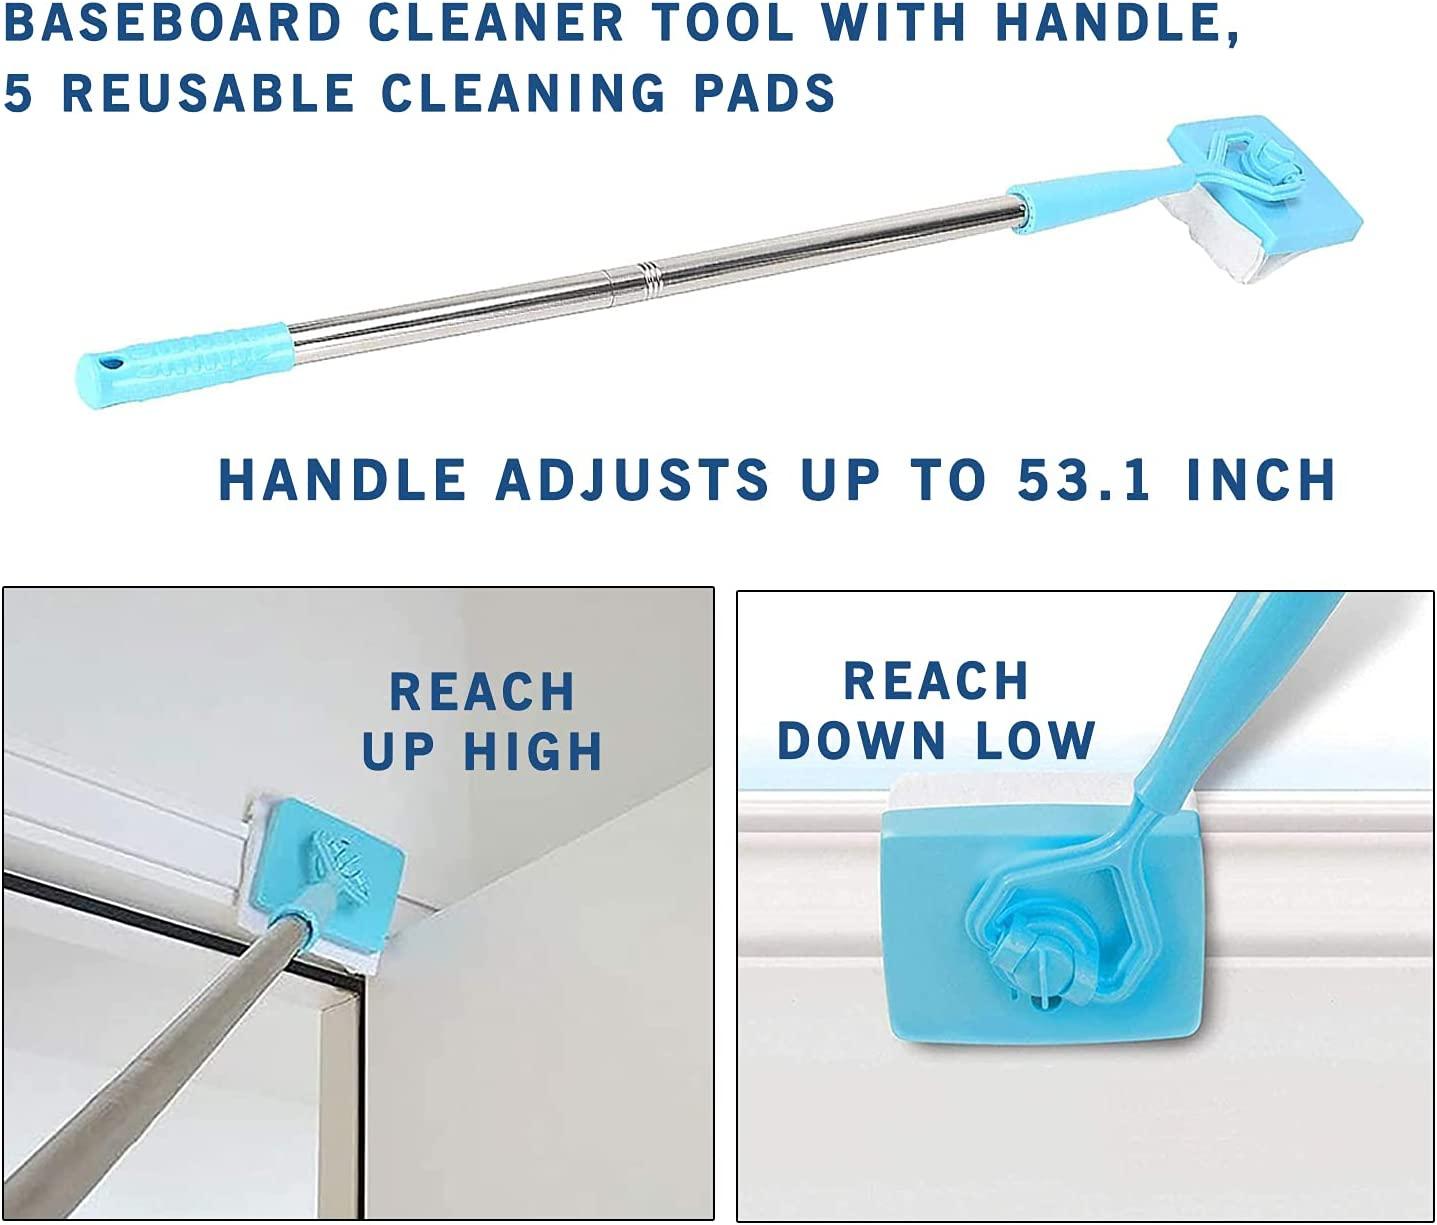 Baseboard Cleaner Tool with Handle 5 Reusable Cloths. Use for